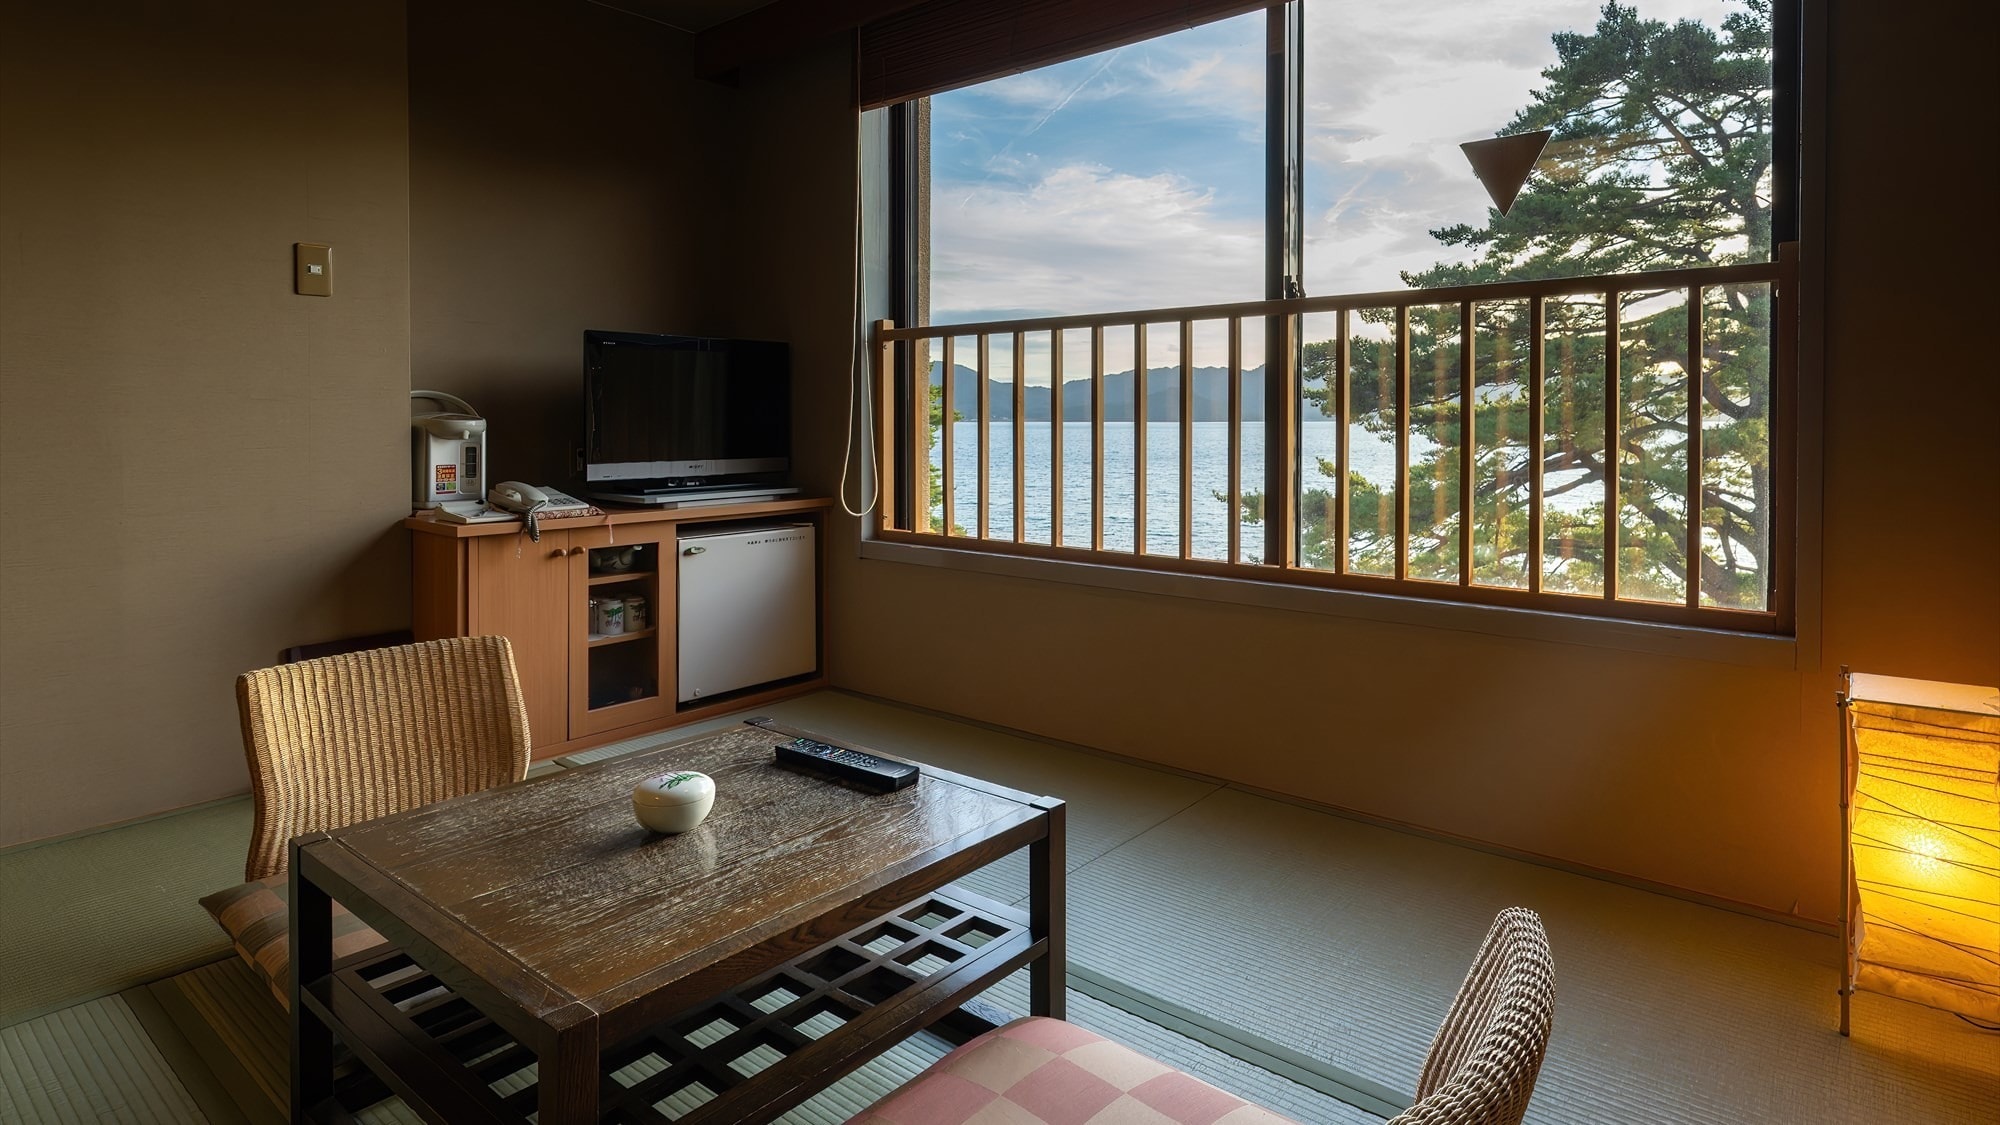 ■Please stretch your legs and relax on the raised tatami floor while looking out at Lake Tazawa.